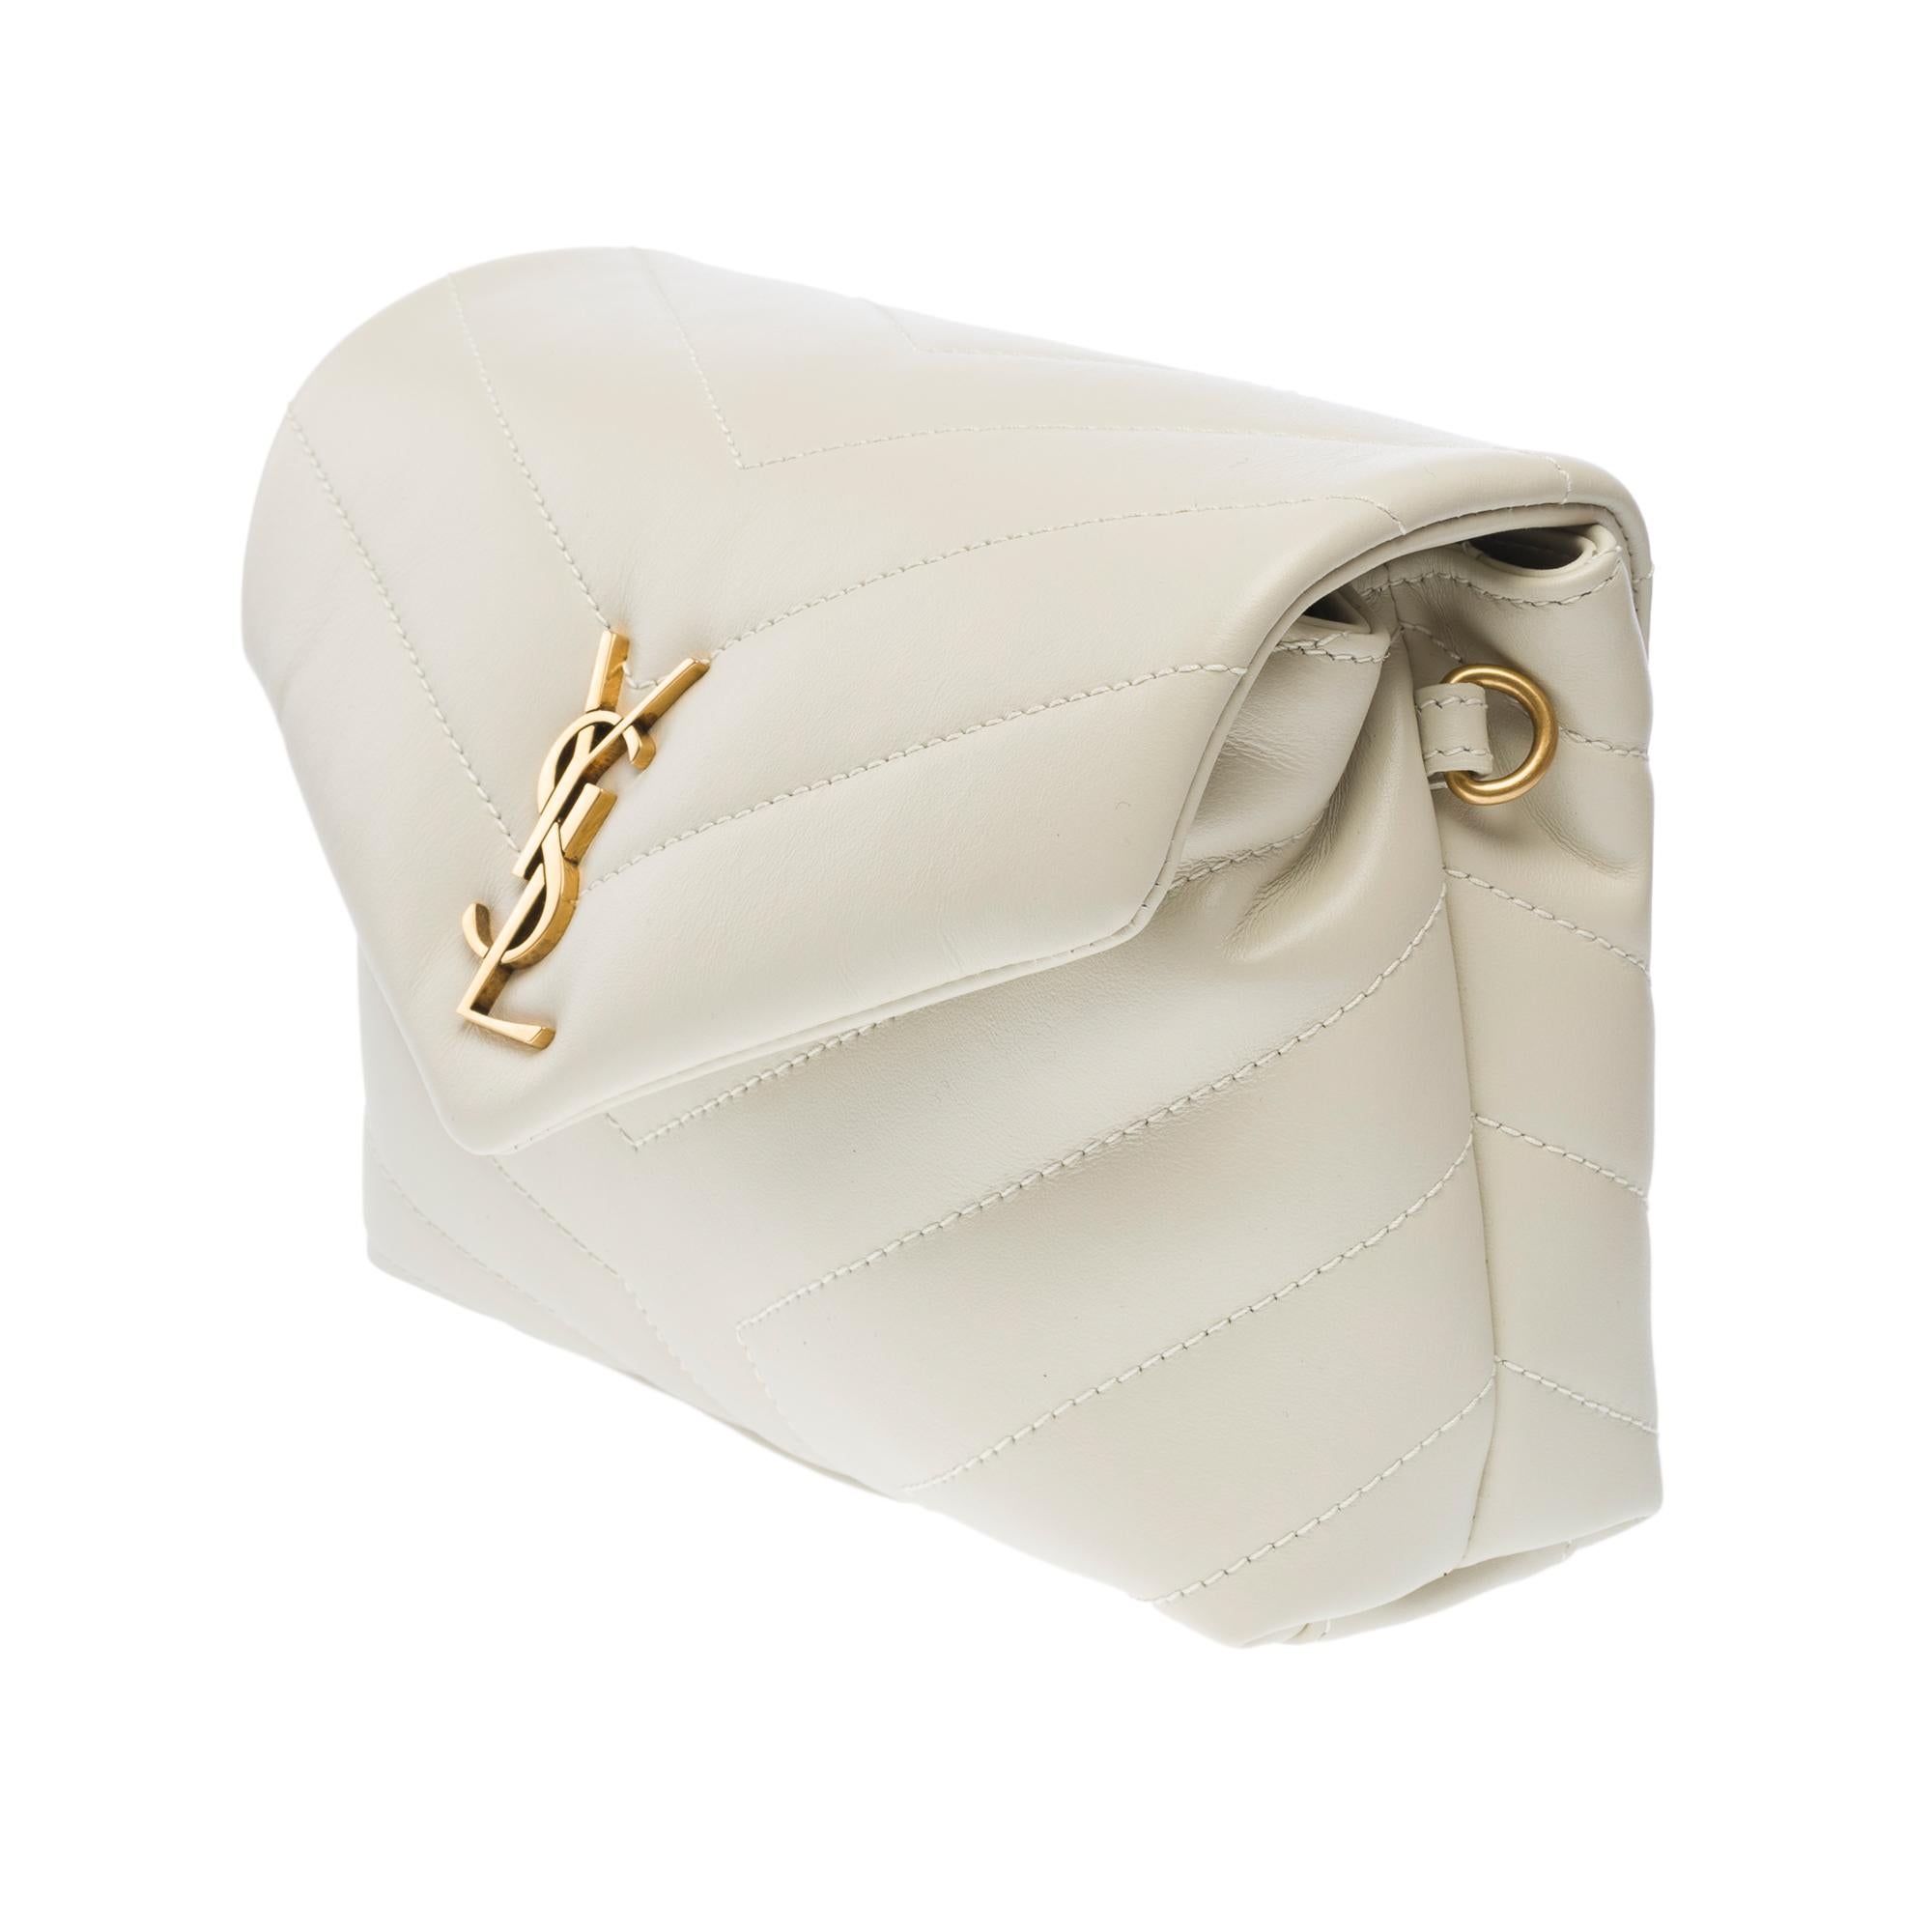 YSL Loulou Toy shoulder bag in beige quilted calf leather, GHW For Sale 1